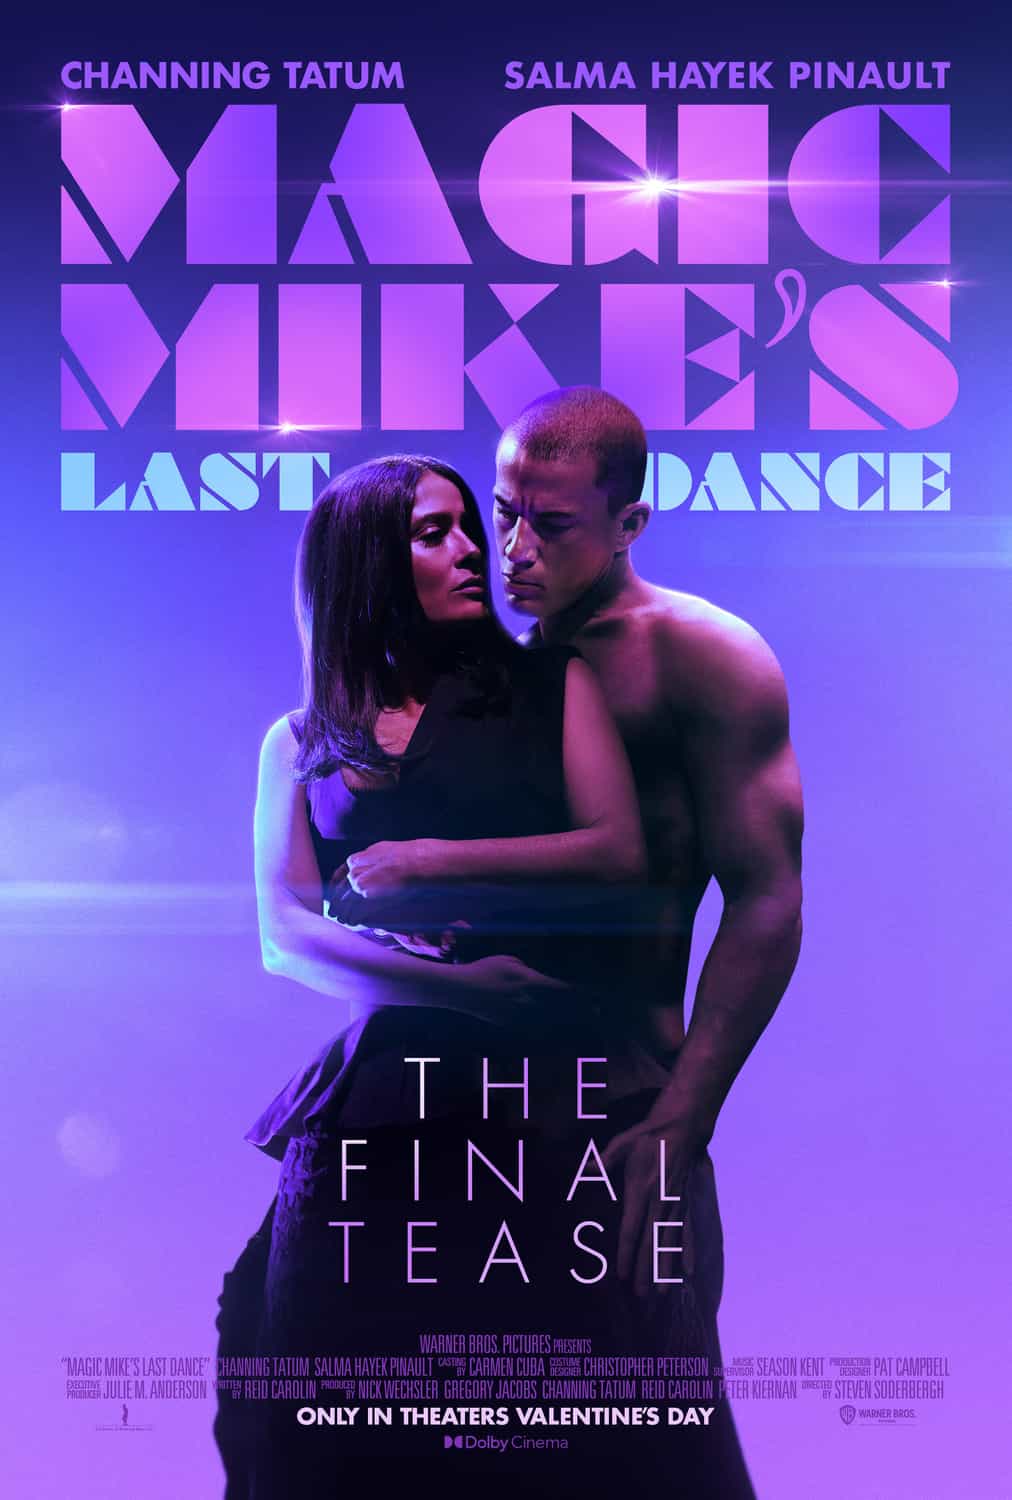 New poster released for Magic Mikes Last Dance starring Channing Tatum - movie UK release date 10th February 2023 #magicmikeslastdance